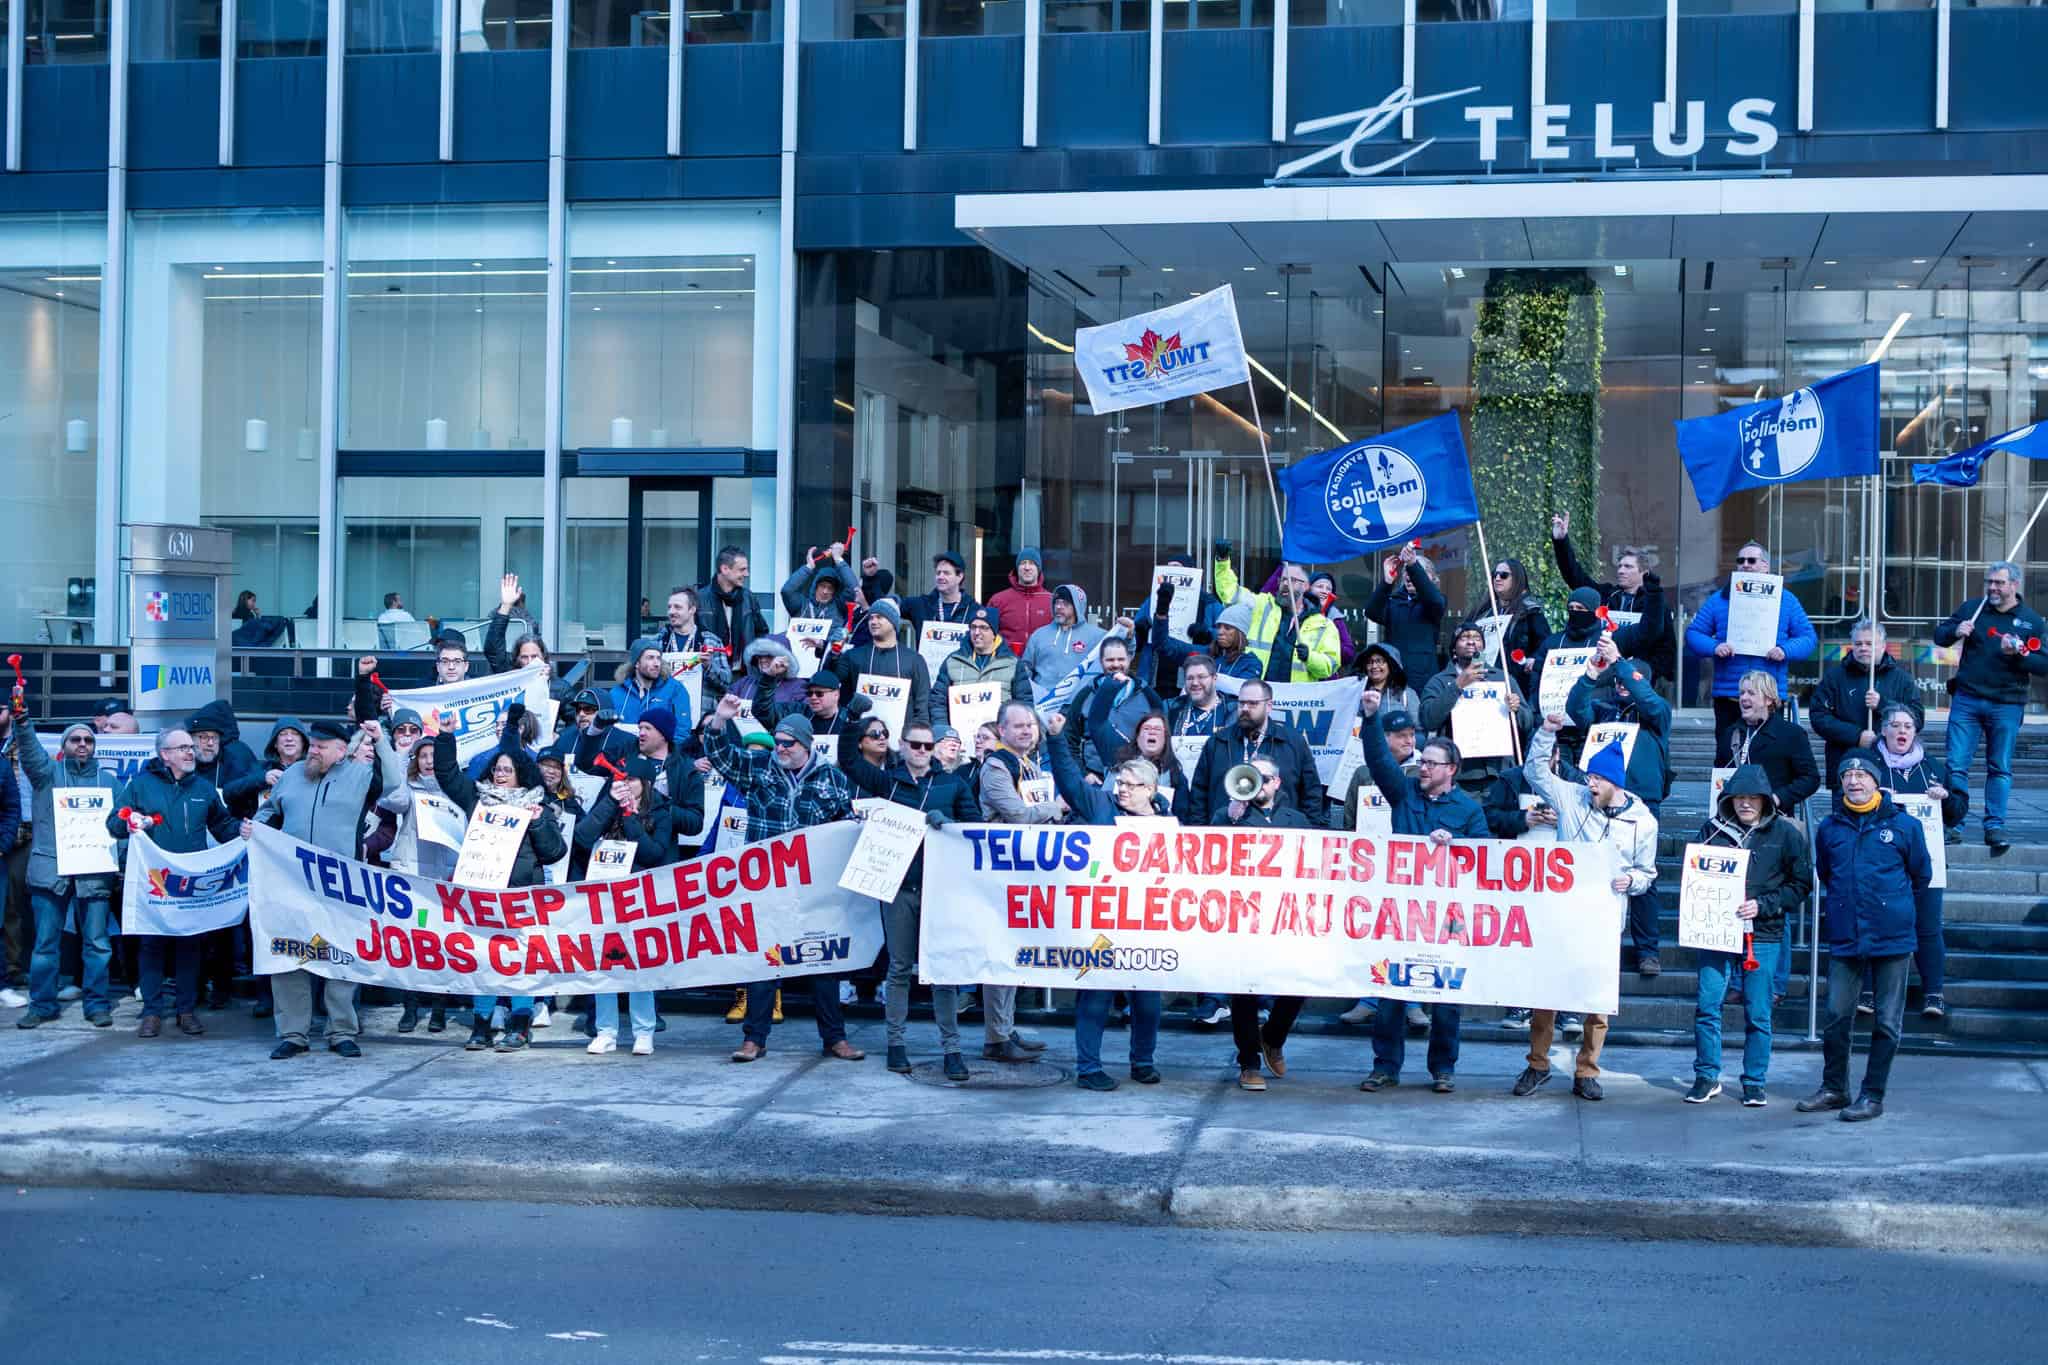 Image: A group of workers hold banners outside a Telus building, saying "Telus: Keep Telecom Jobs Canadian."